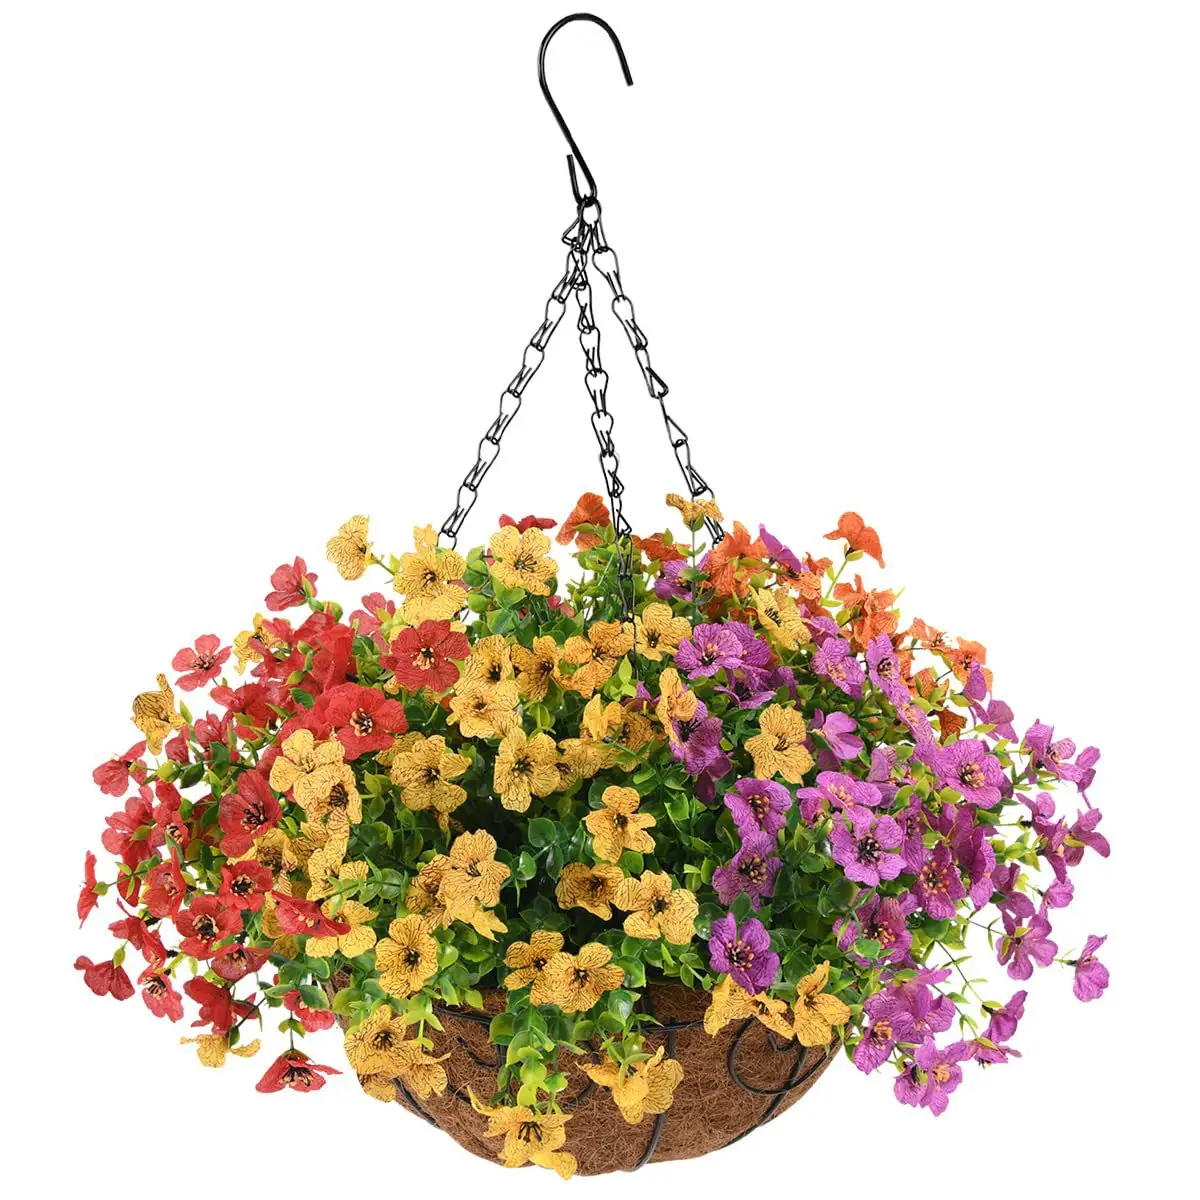 Wholesale Handmade Hanging Artificial Flower Hanging Basket With Silk Daisy Flowers For Outdoor Indoor Decoration